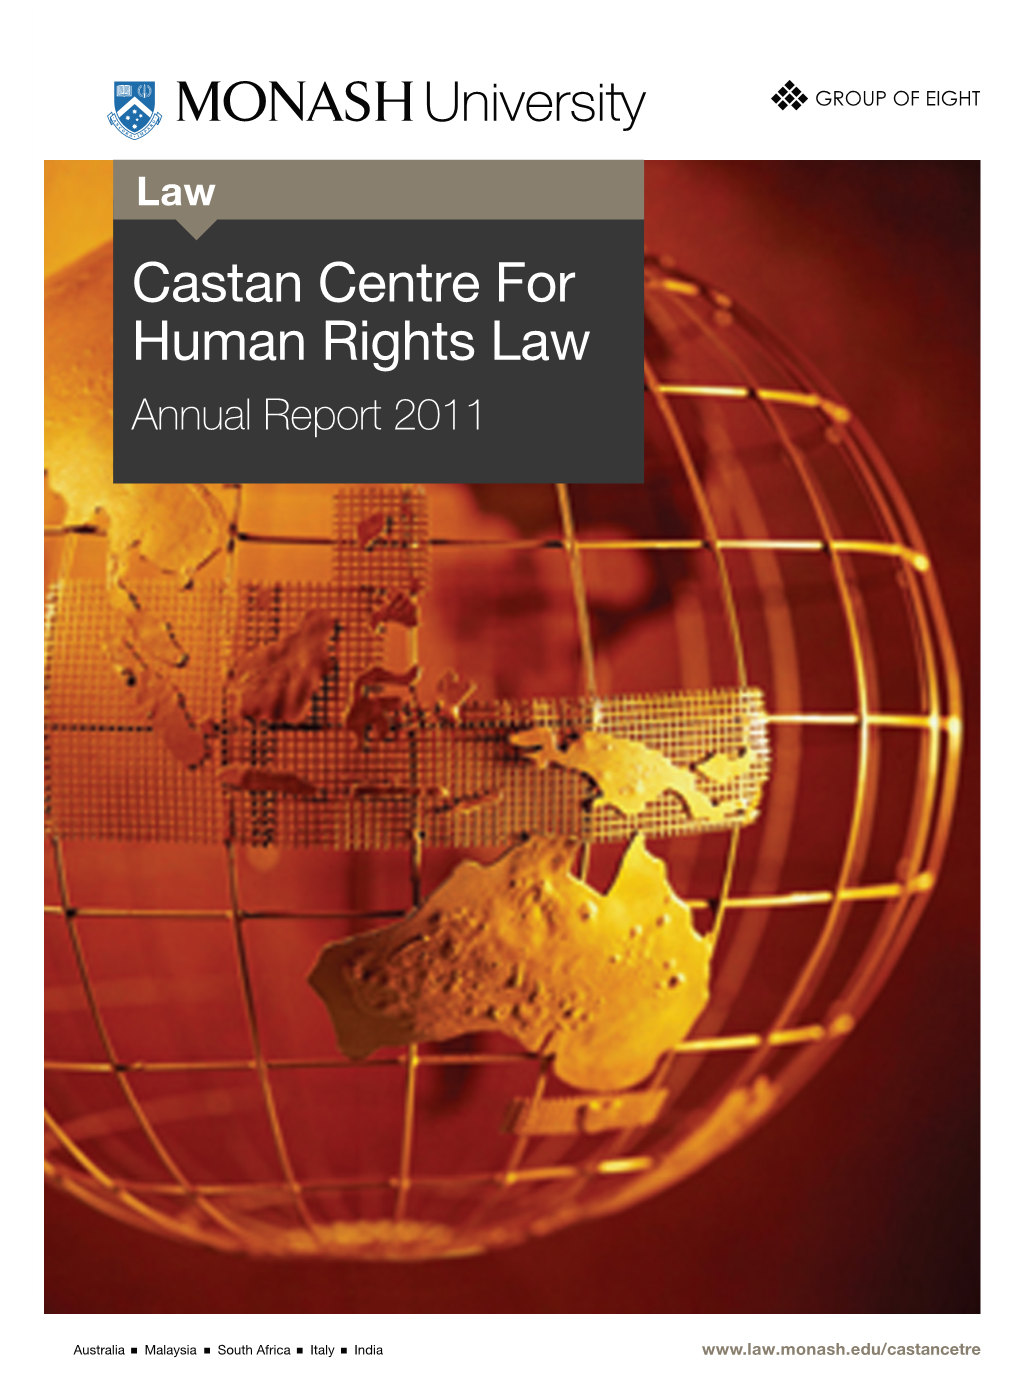 Castan Centre for Human Rights Law Annual Report 2011